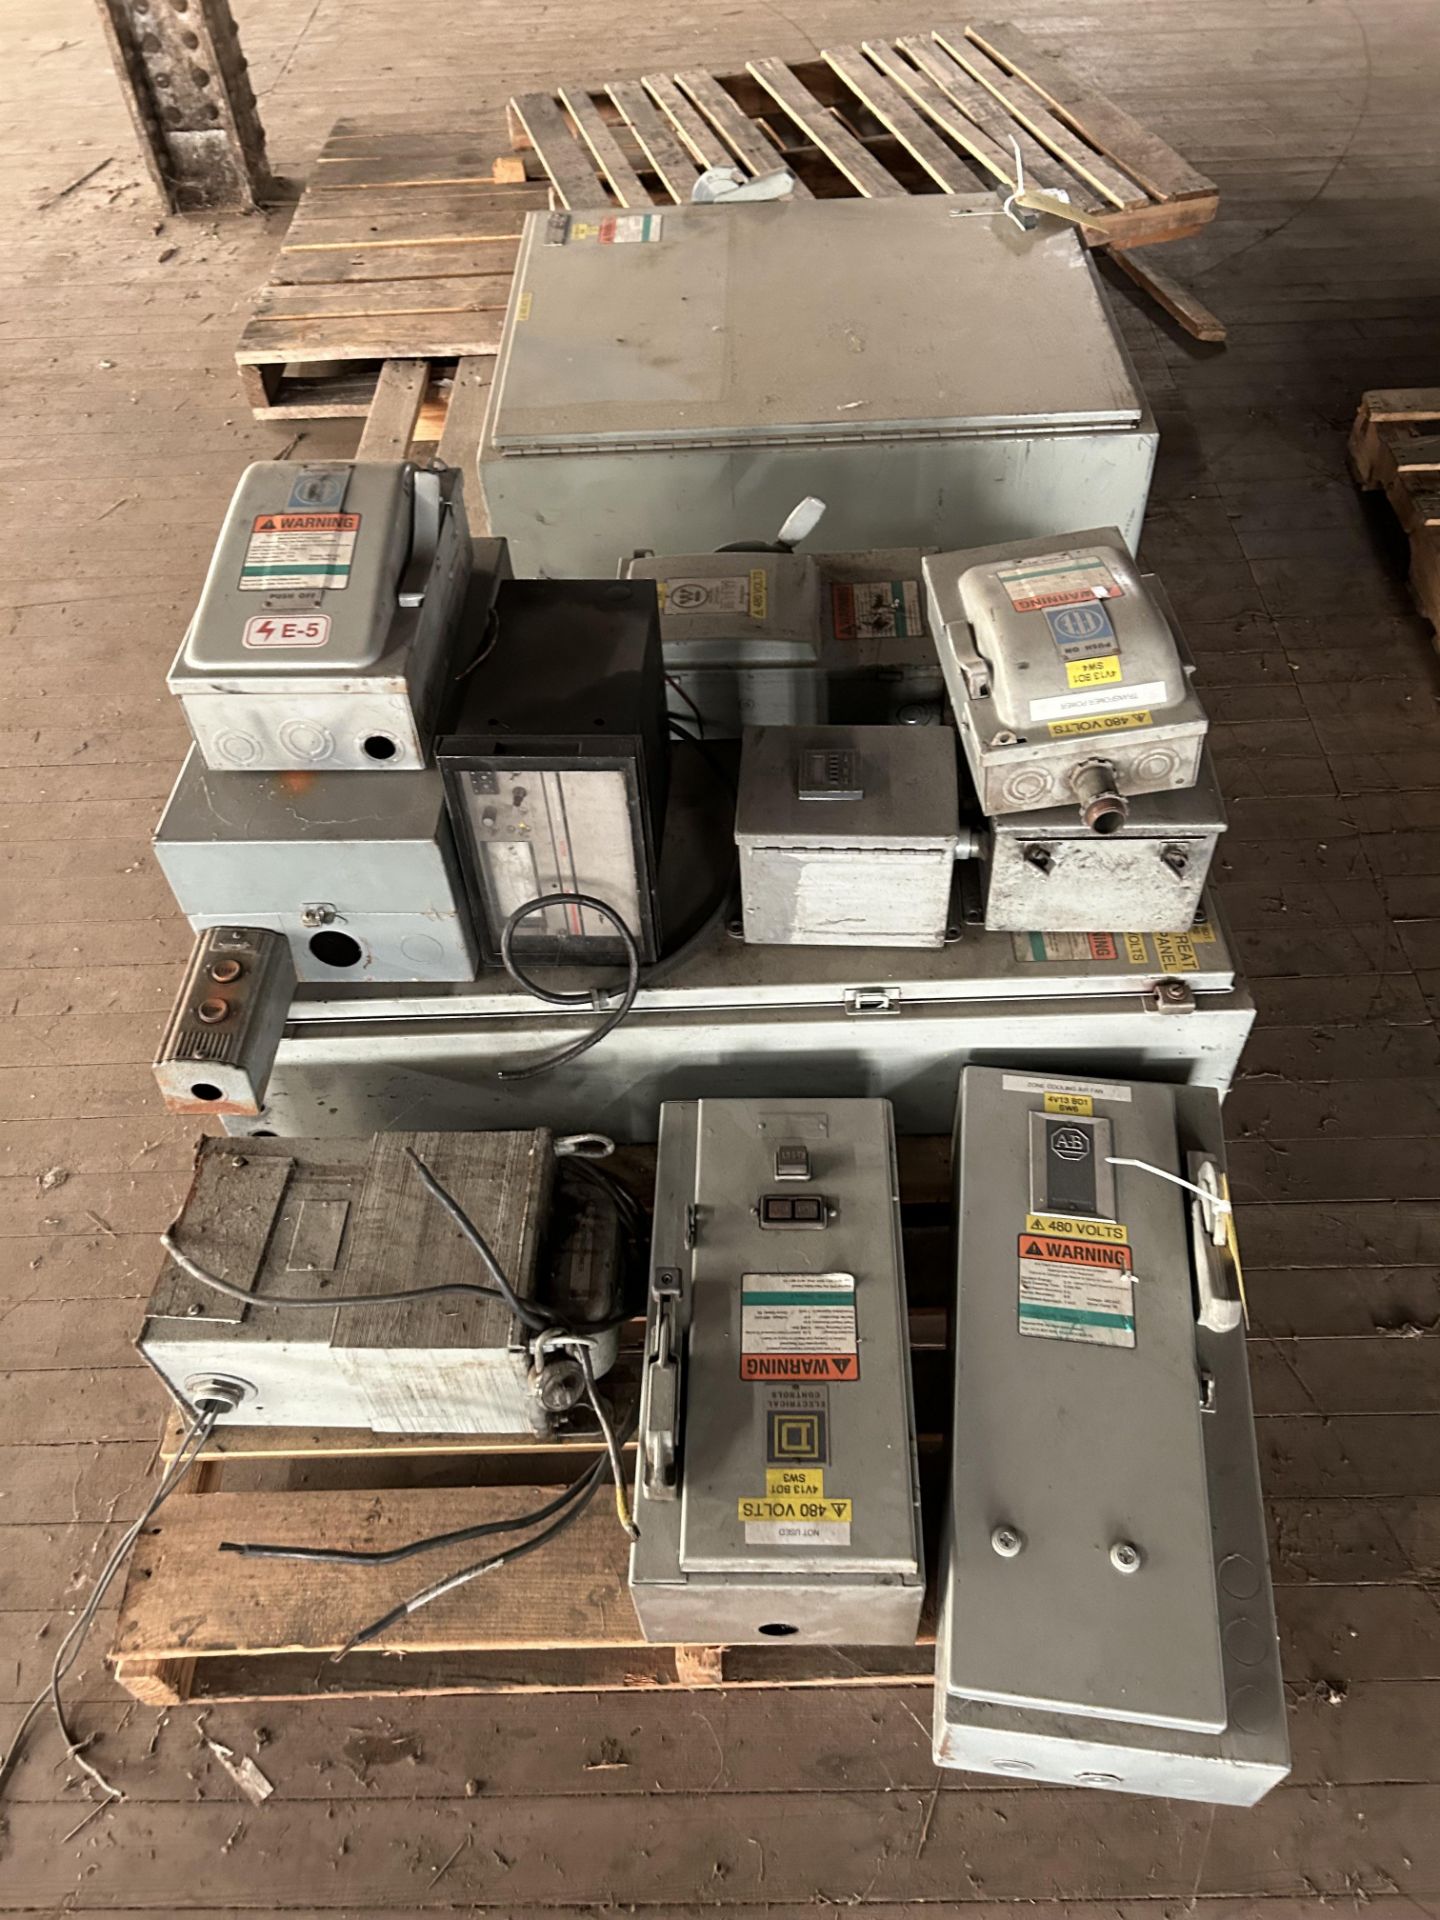 Spare Parts & Eletrical Components, Rigging/ Removal Fee - $325 - Image 8 of 12